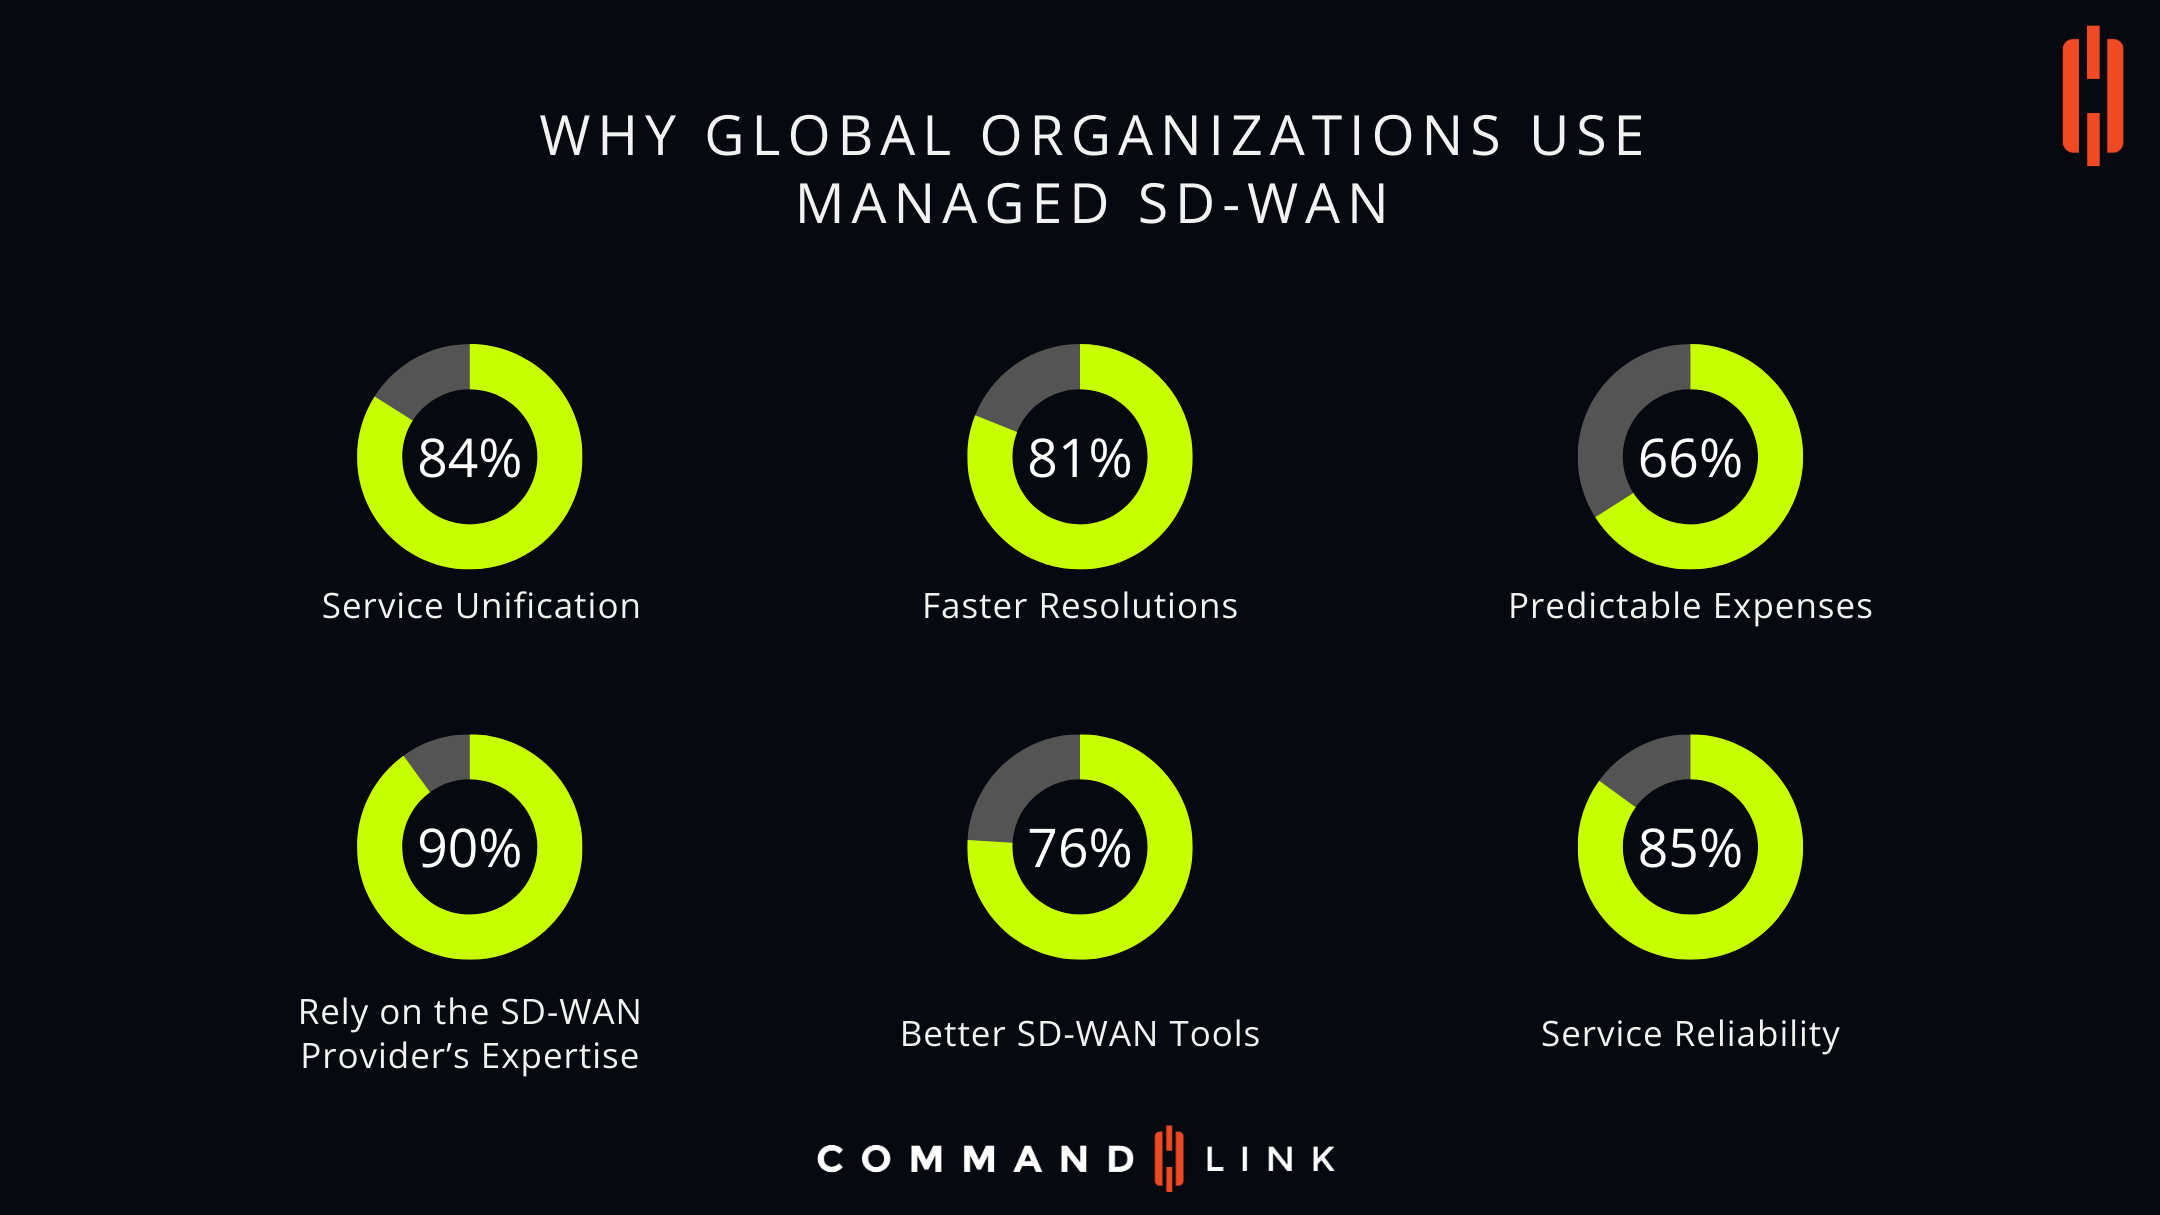 WHY GLOBAL ORGANIZATIONS USE MANAGED SD-WAN